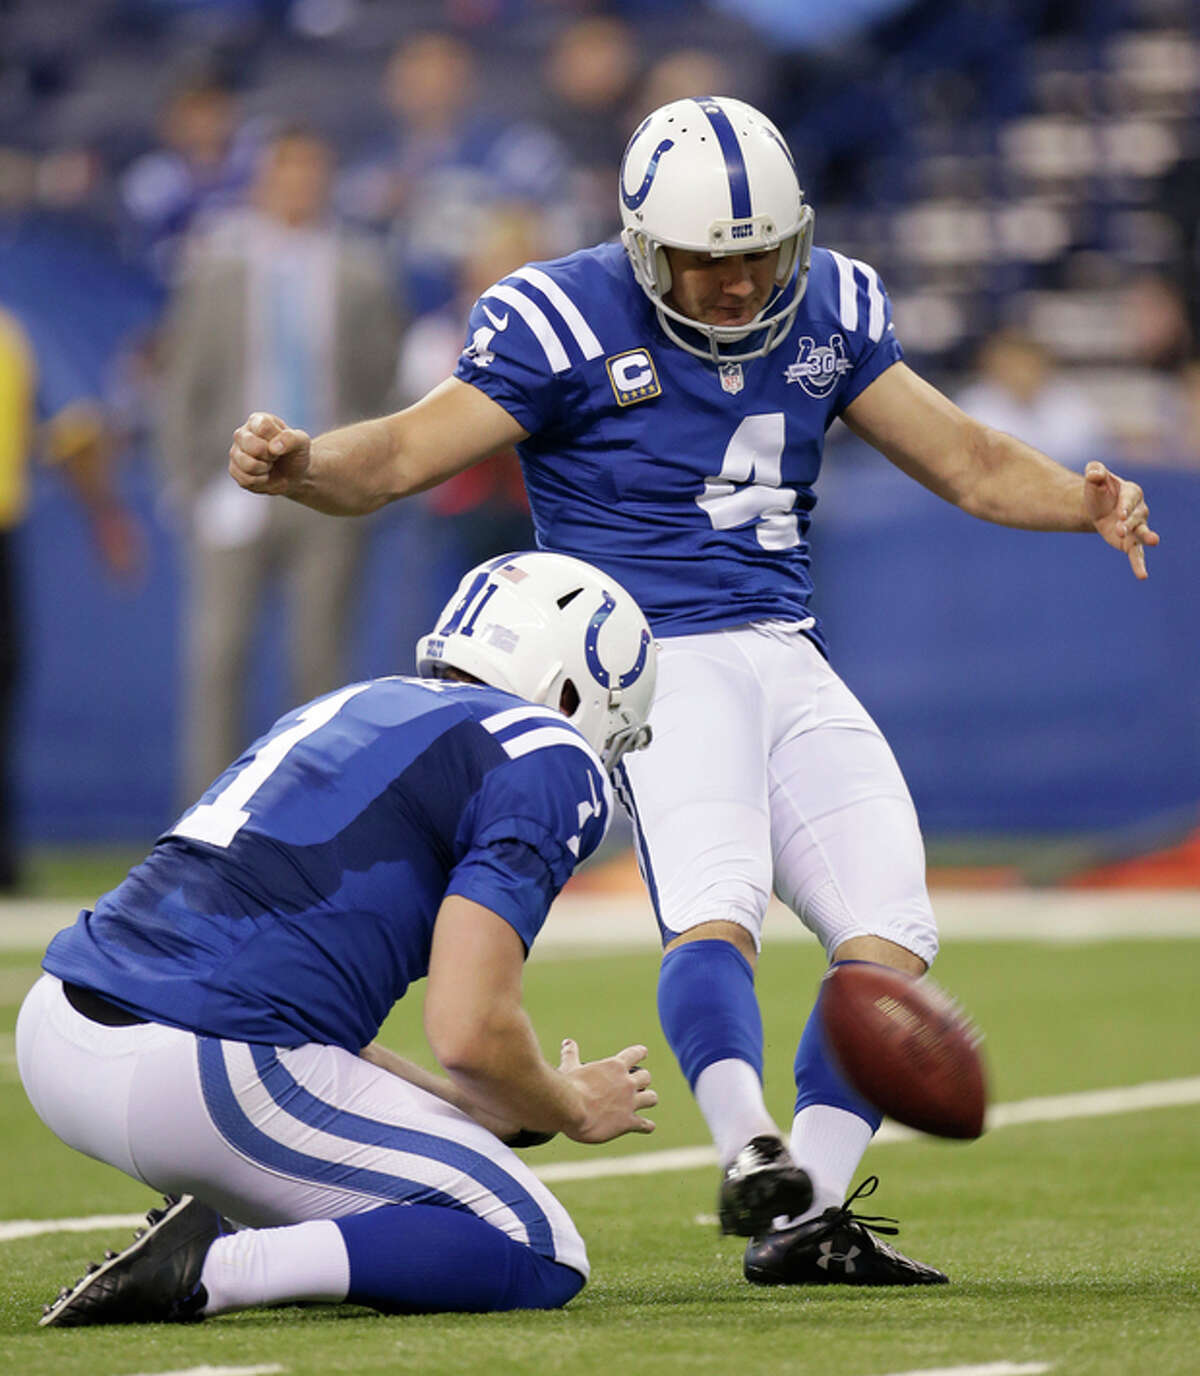 Indianapolis Colts' Adam Vinatieri (4) kicks a 23-yard field goal out of the hold of Pat McAfee (1) during the first half of an NFL football game against the Jacksonville Jaguars, Sunday, Dec. 29, 2013, in Indianapolis. (AP Photo/AJ Mast)